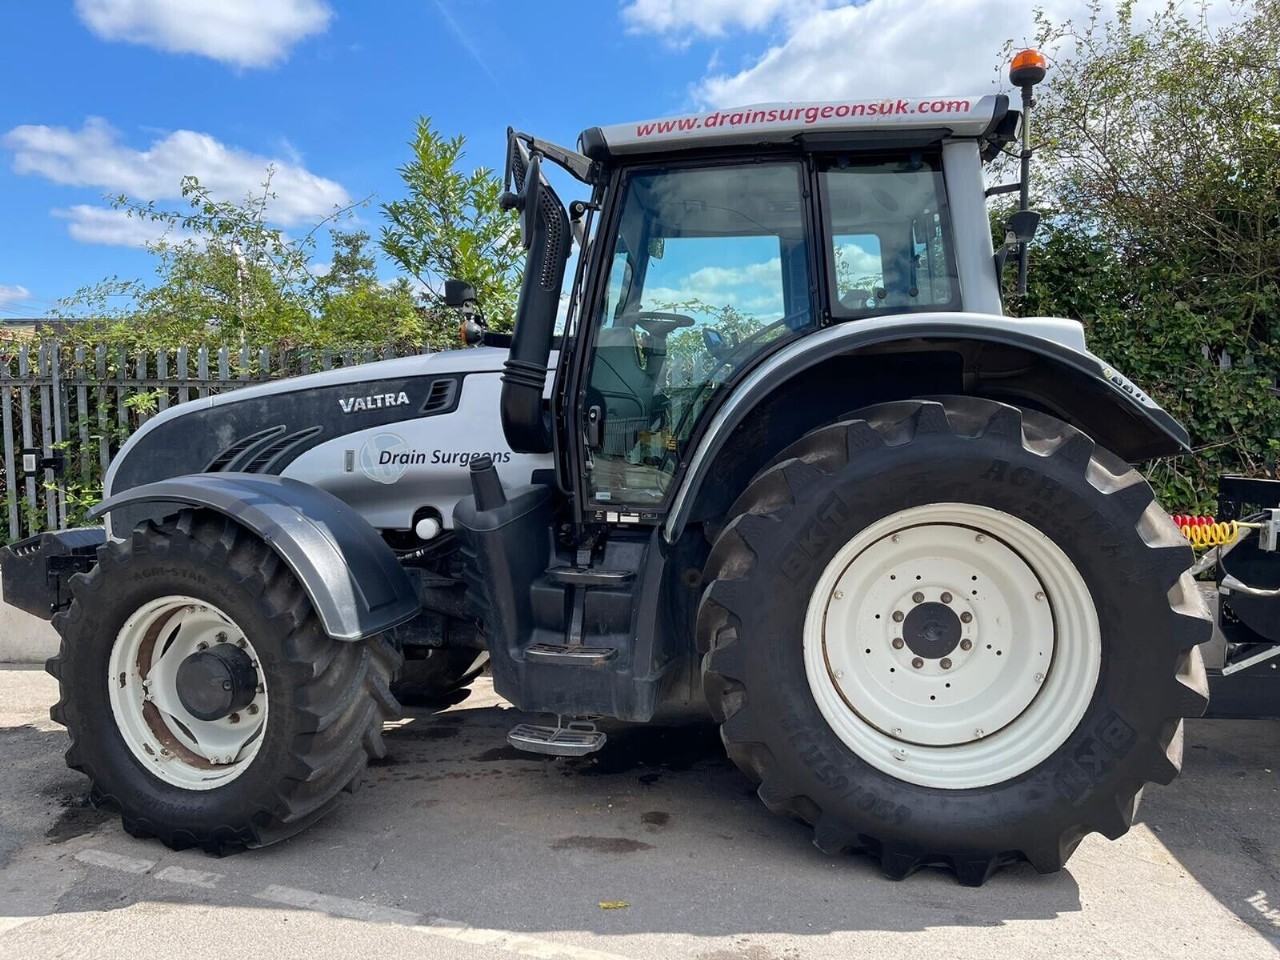 To troubleshoot a hydraulic breakdown in a Valtra T162 tractor